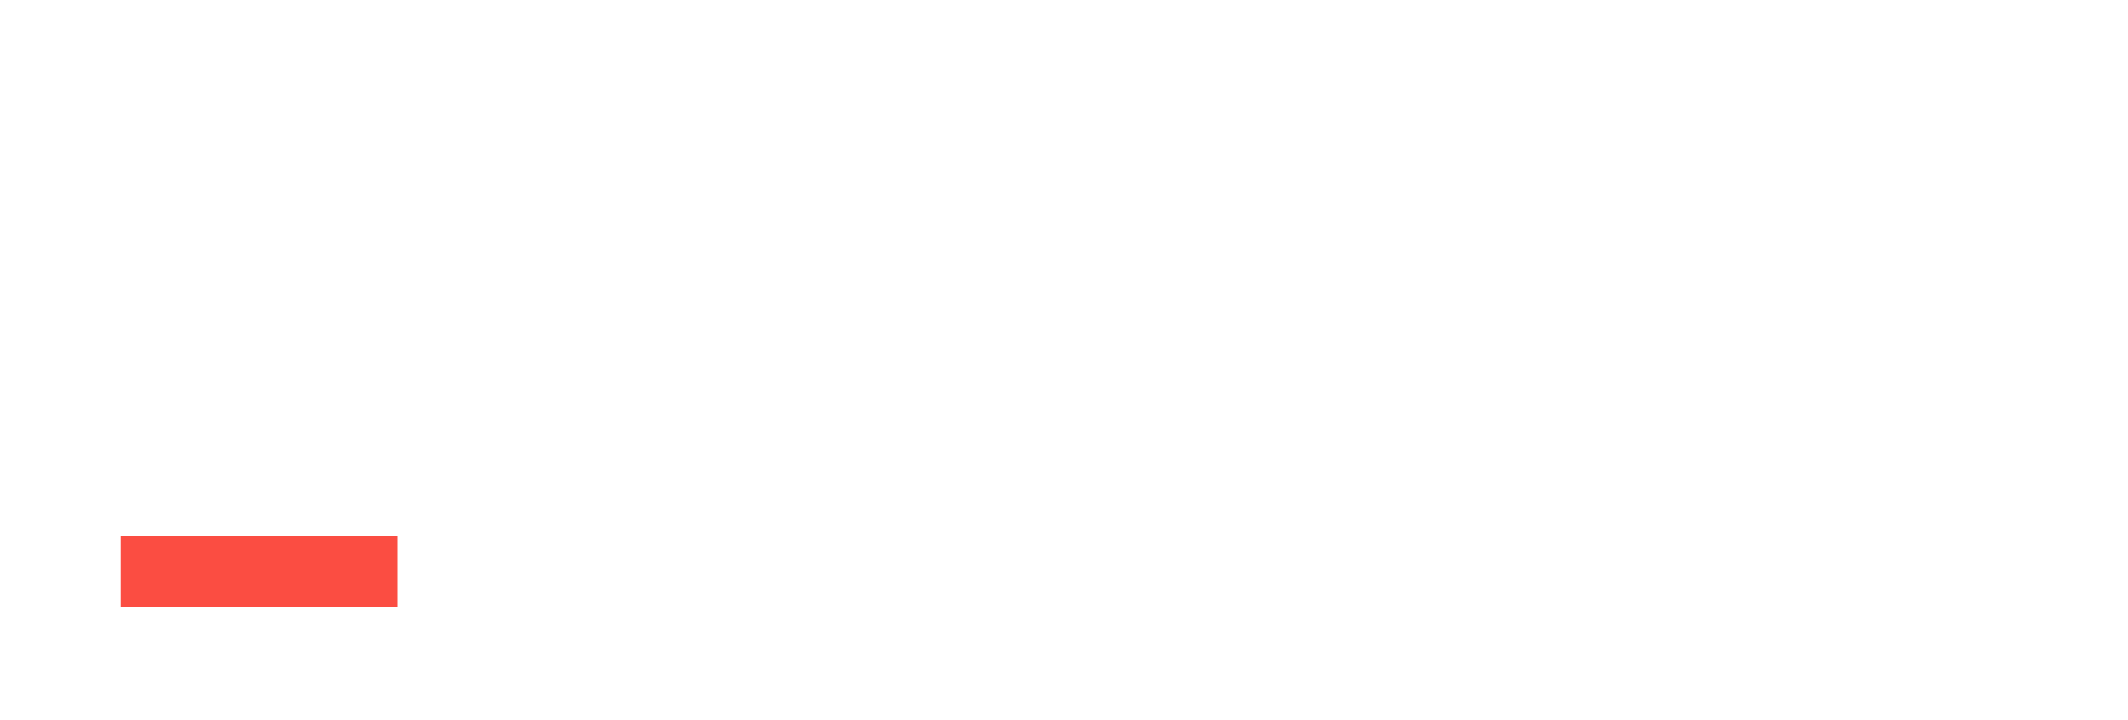 Logo for City of Boston Youth Employment and Opportunity